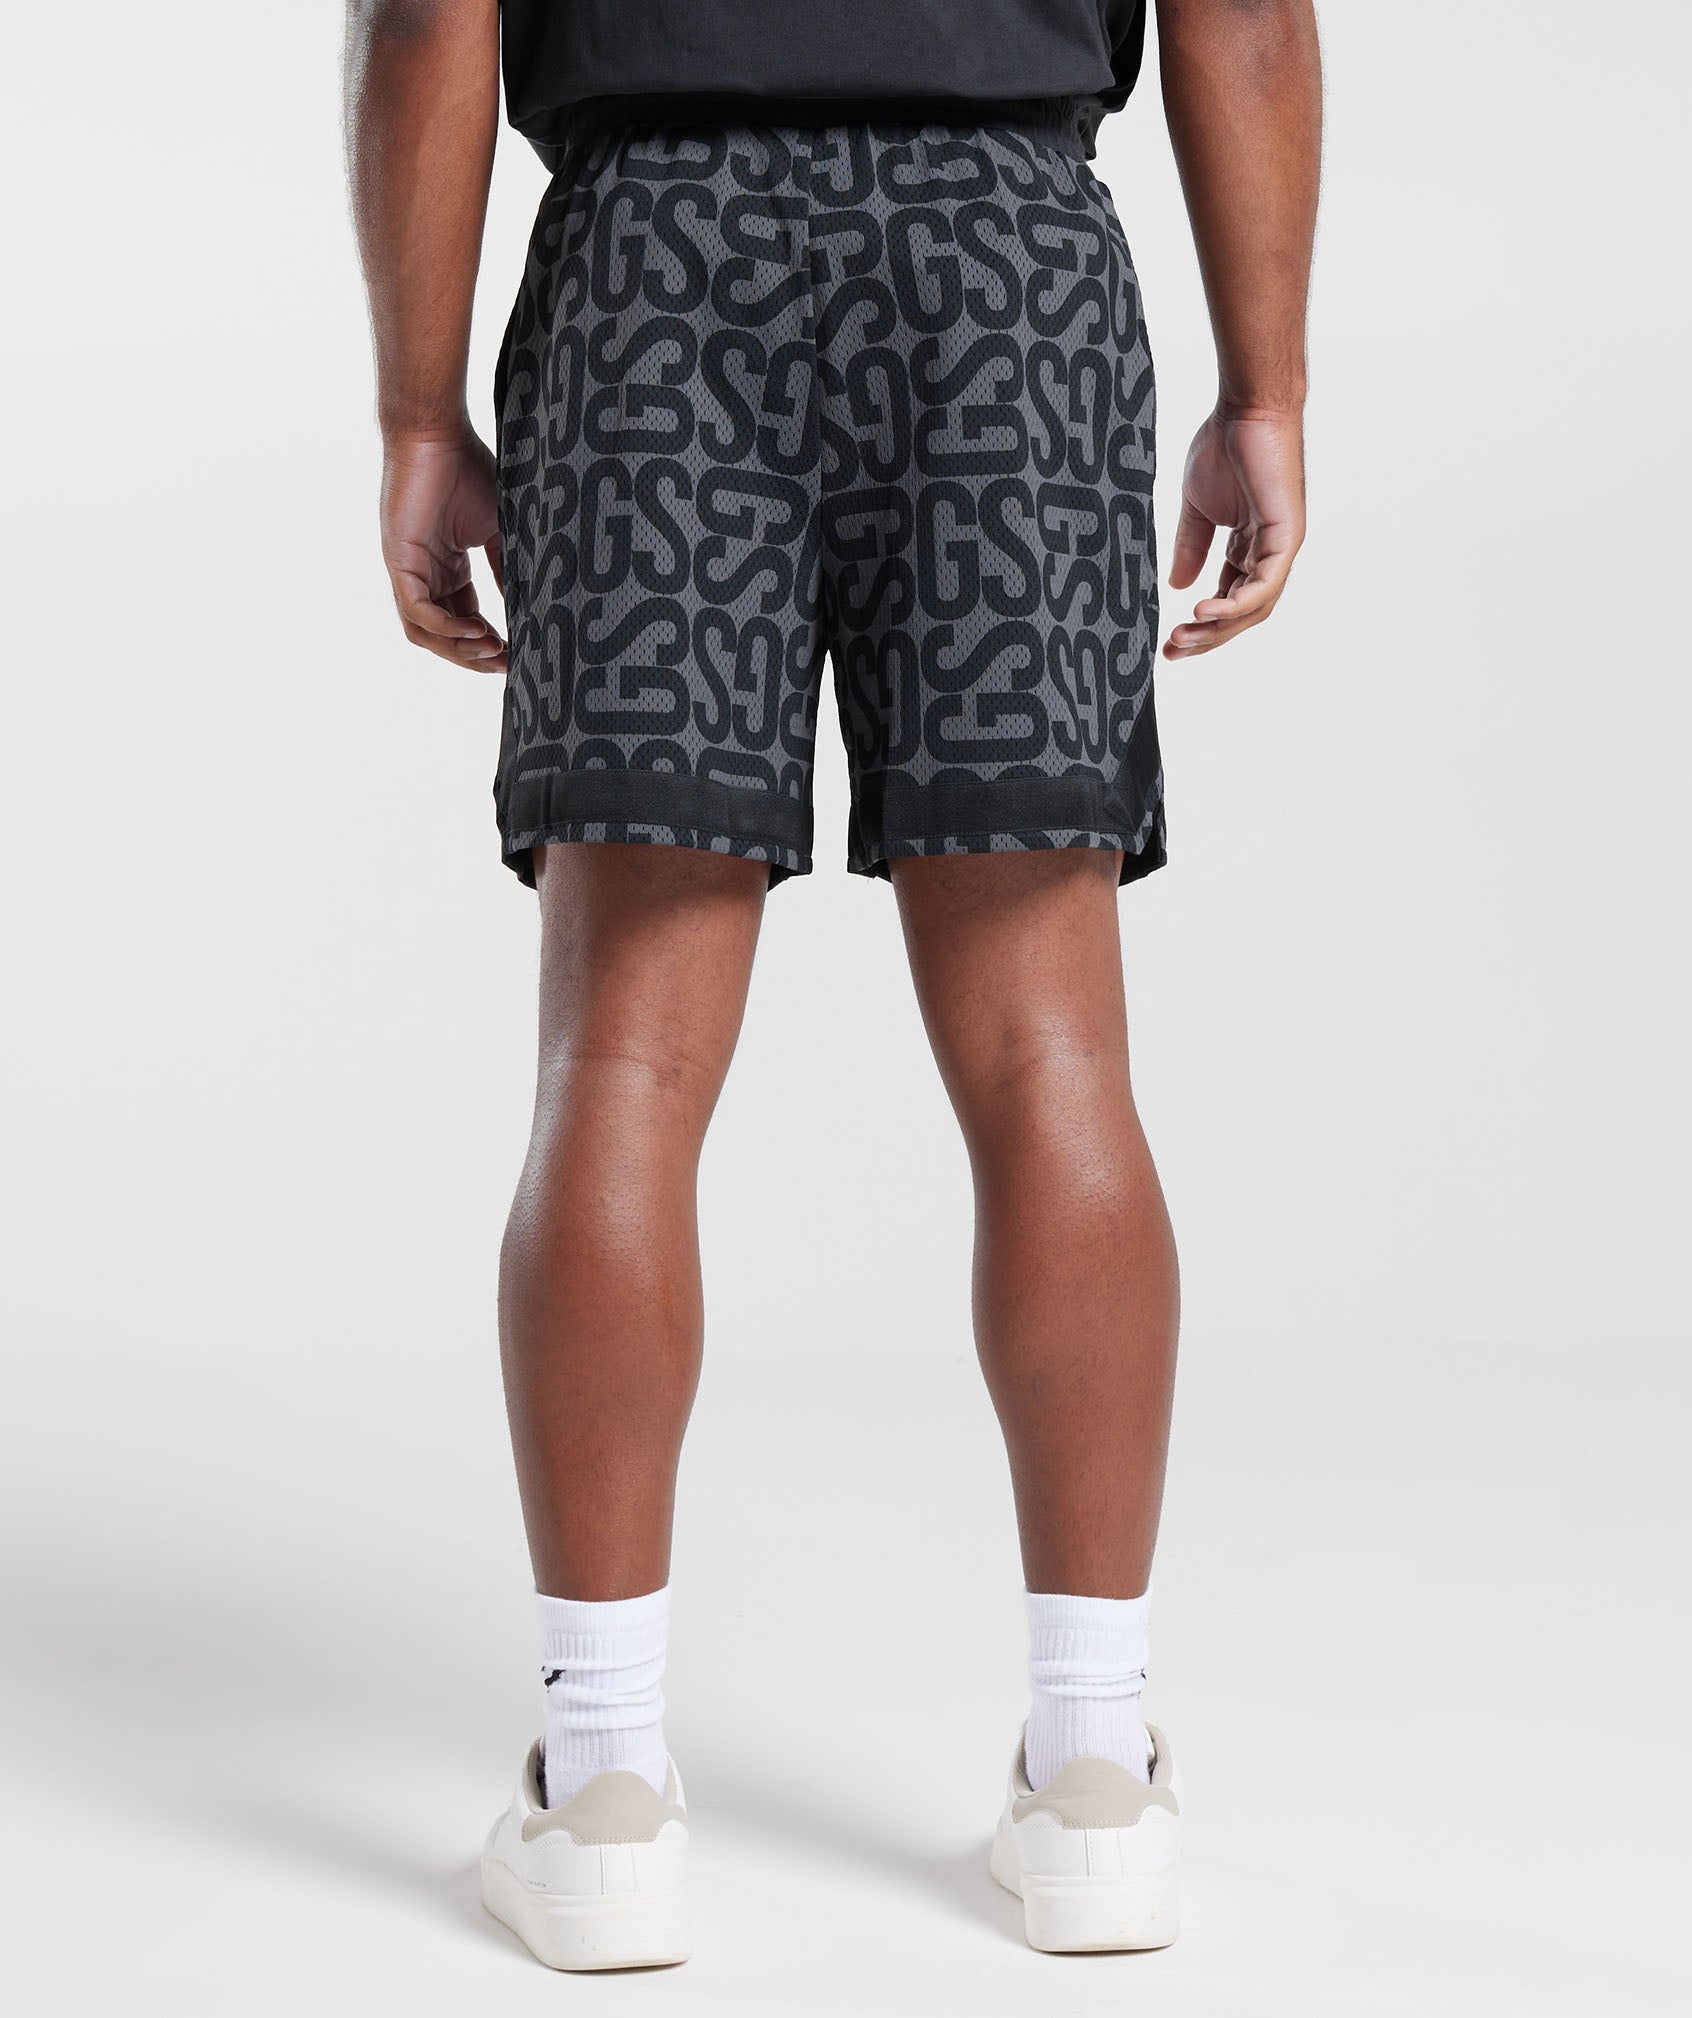 Rest Day Shorts in {{variantColor} is out of stock